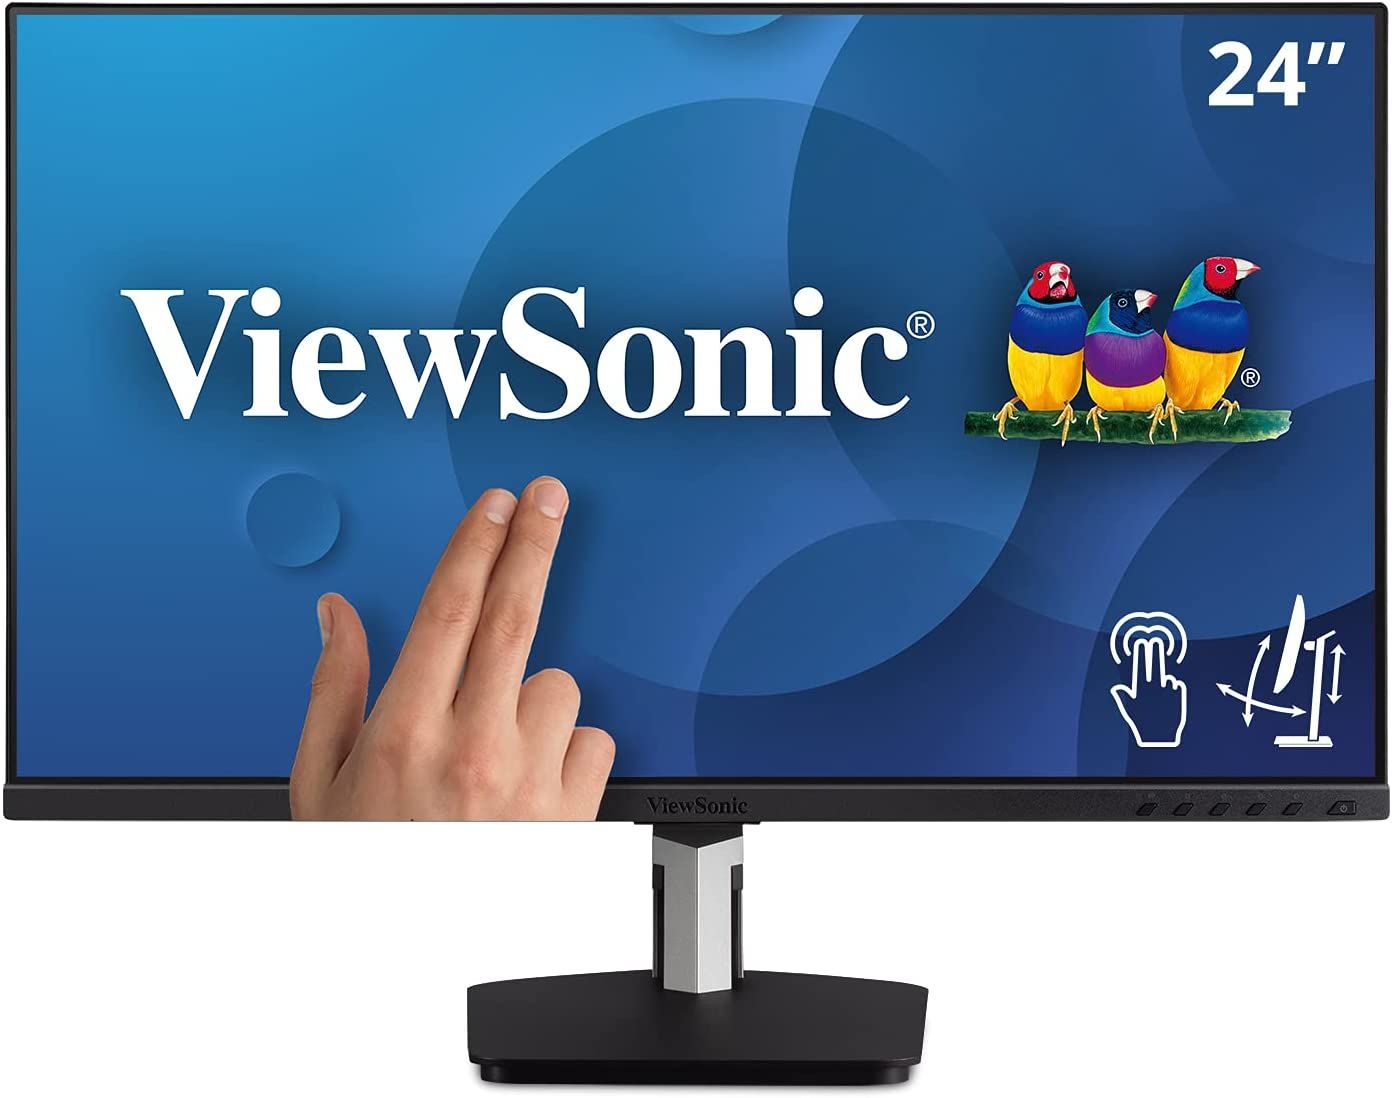 An image showing the front-view of ViewSonic TD2455